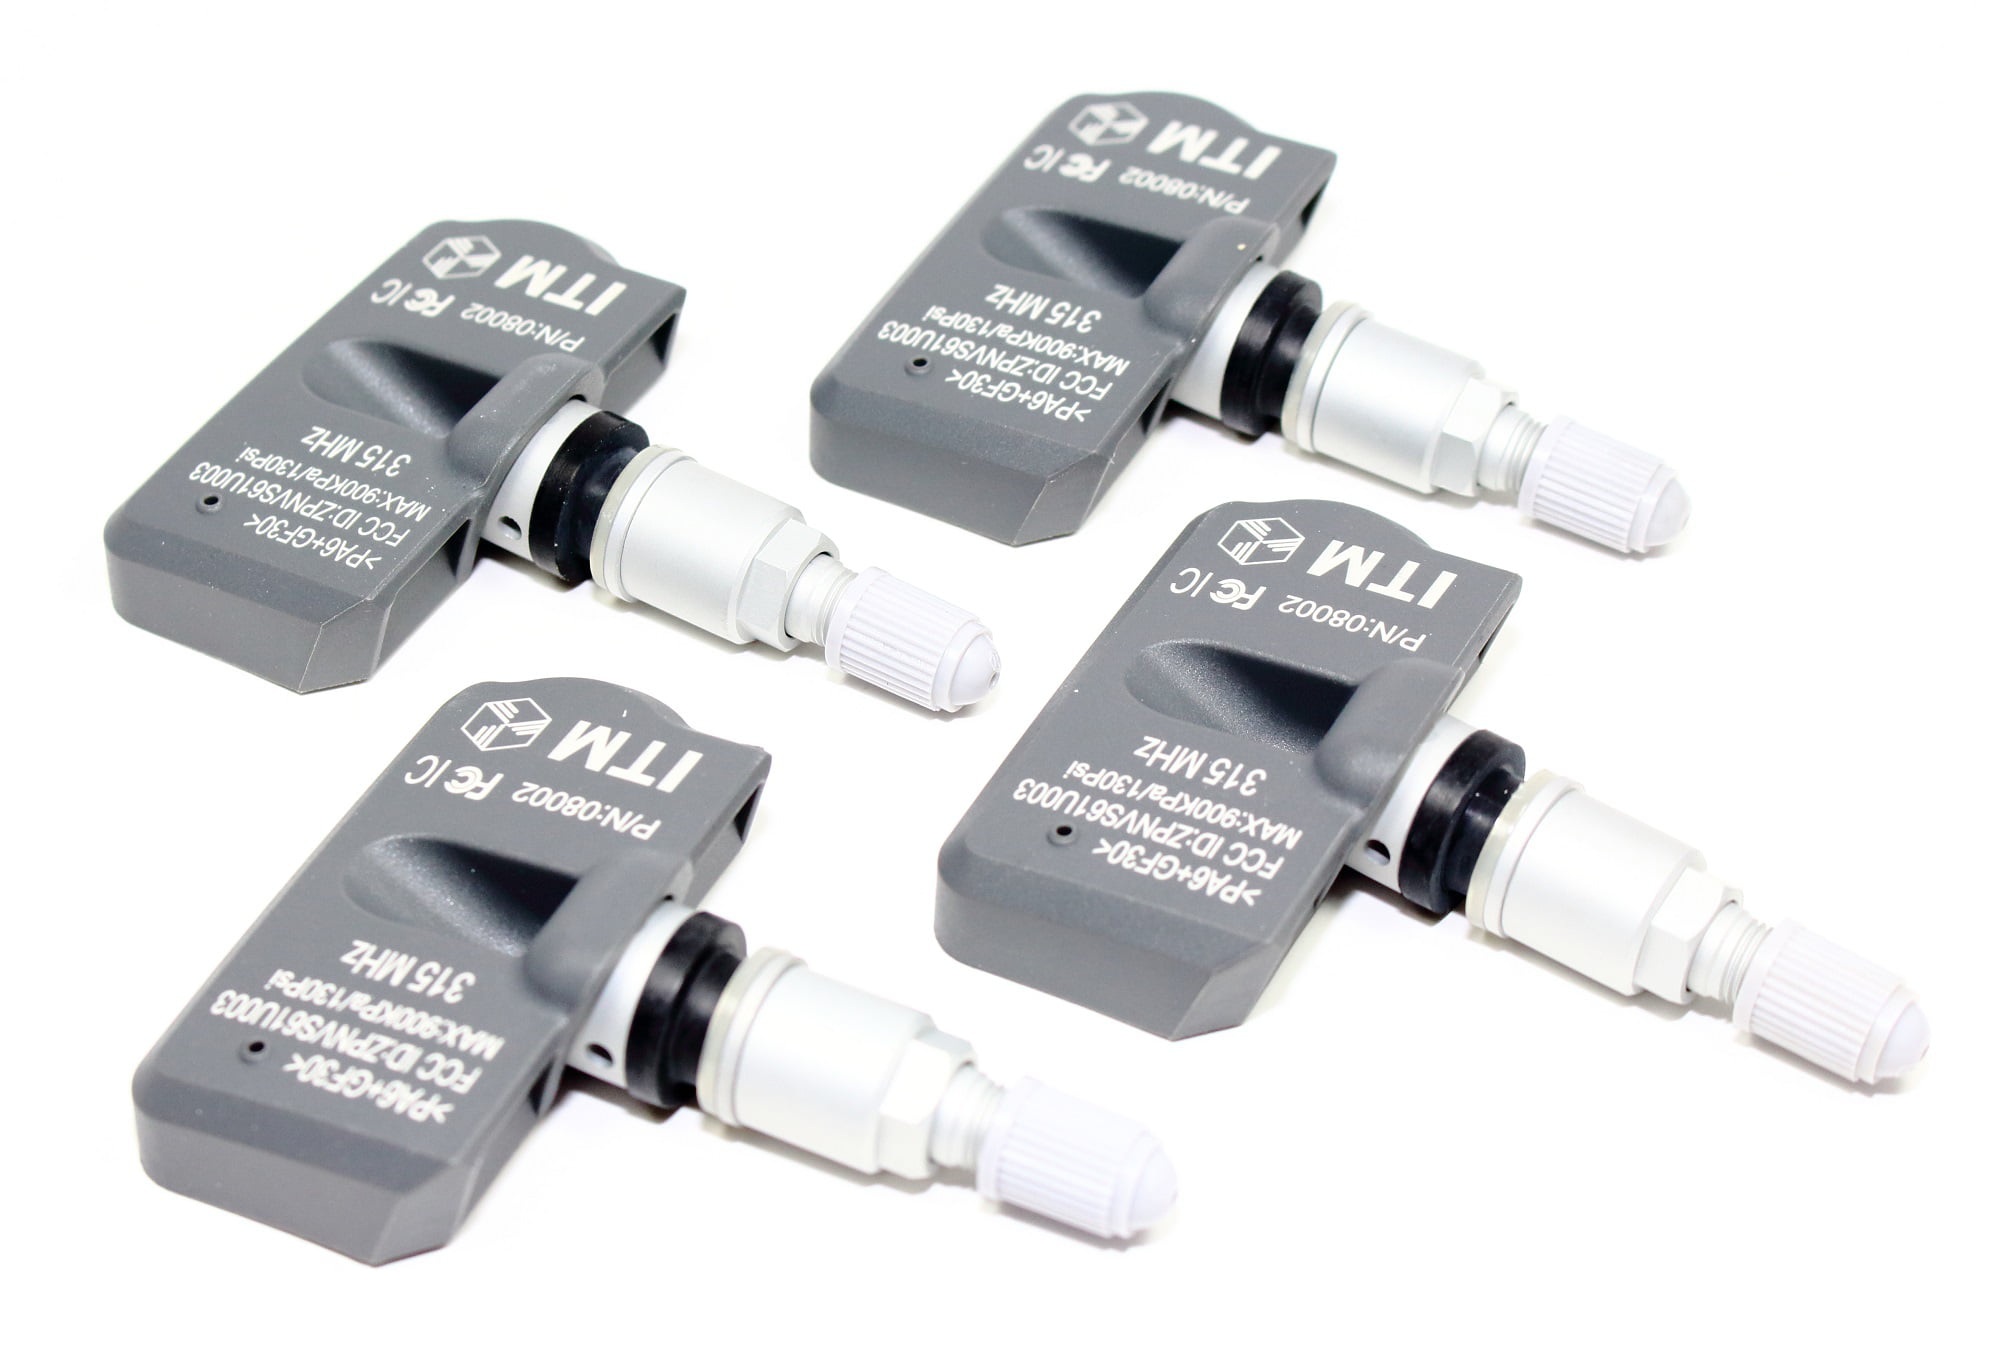 TPMS Tire Pressure Sensors for 2009 2010 2011 2012 2013 2014 Ford F-150 4